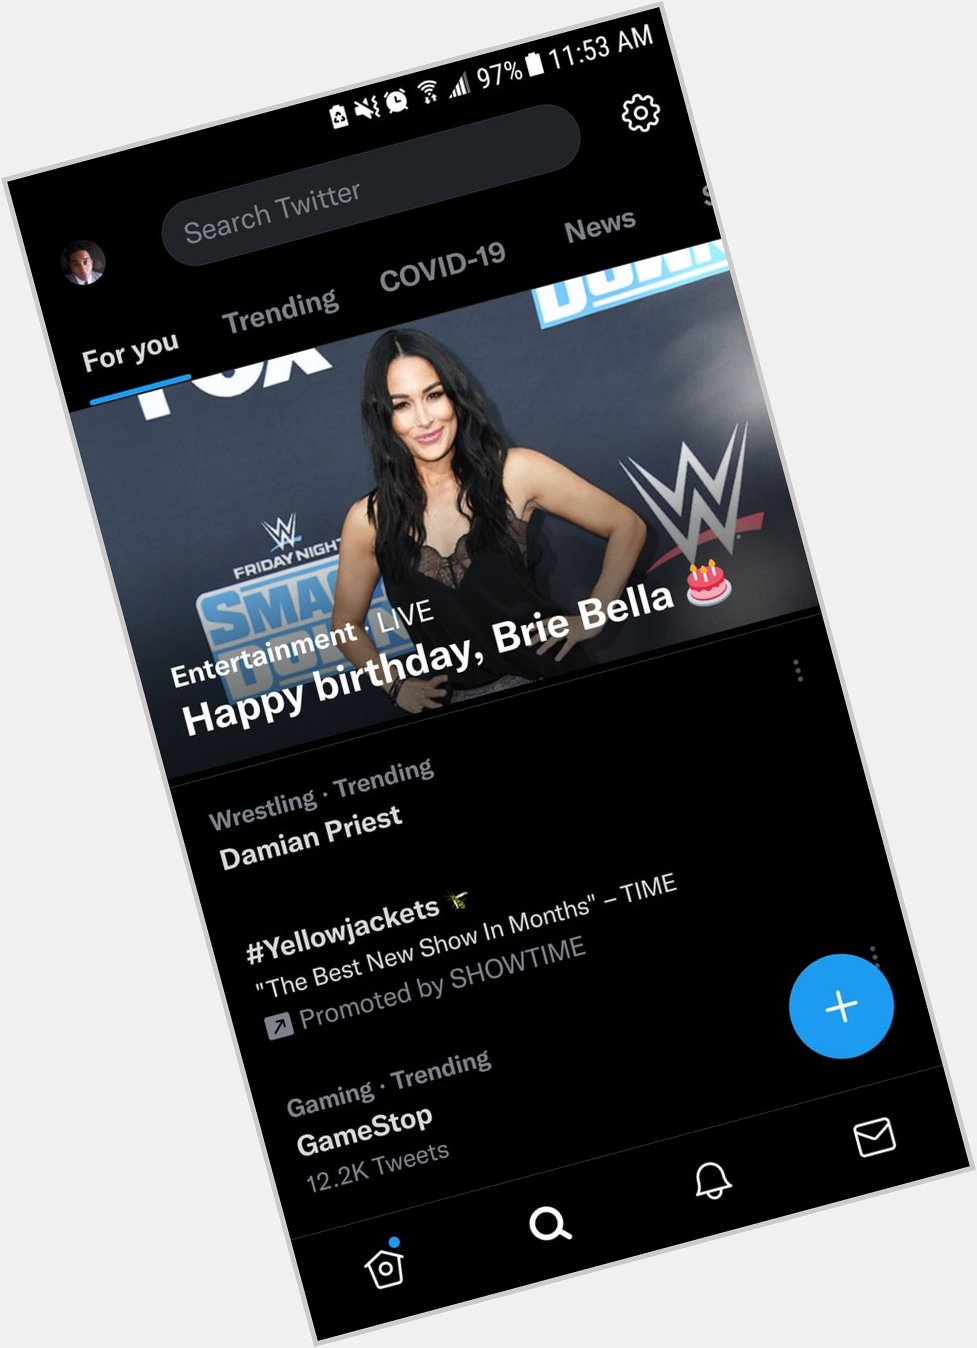 I guess message forgot Brie Bella has a twin sister named Nikki. Happy birthday to the 